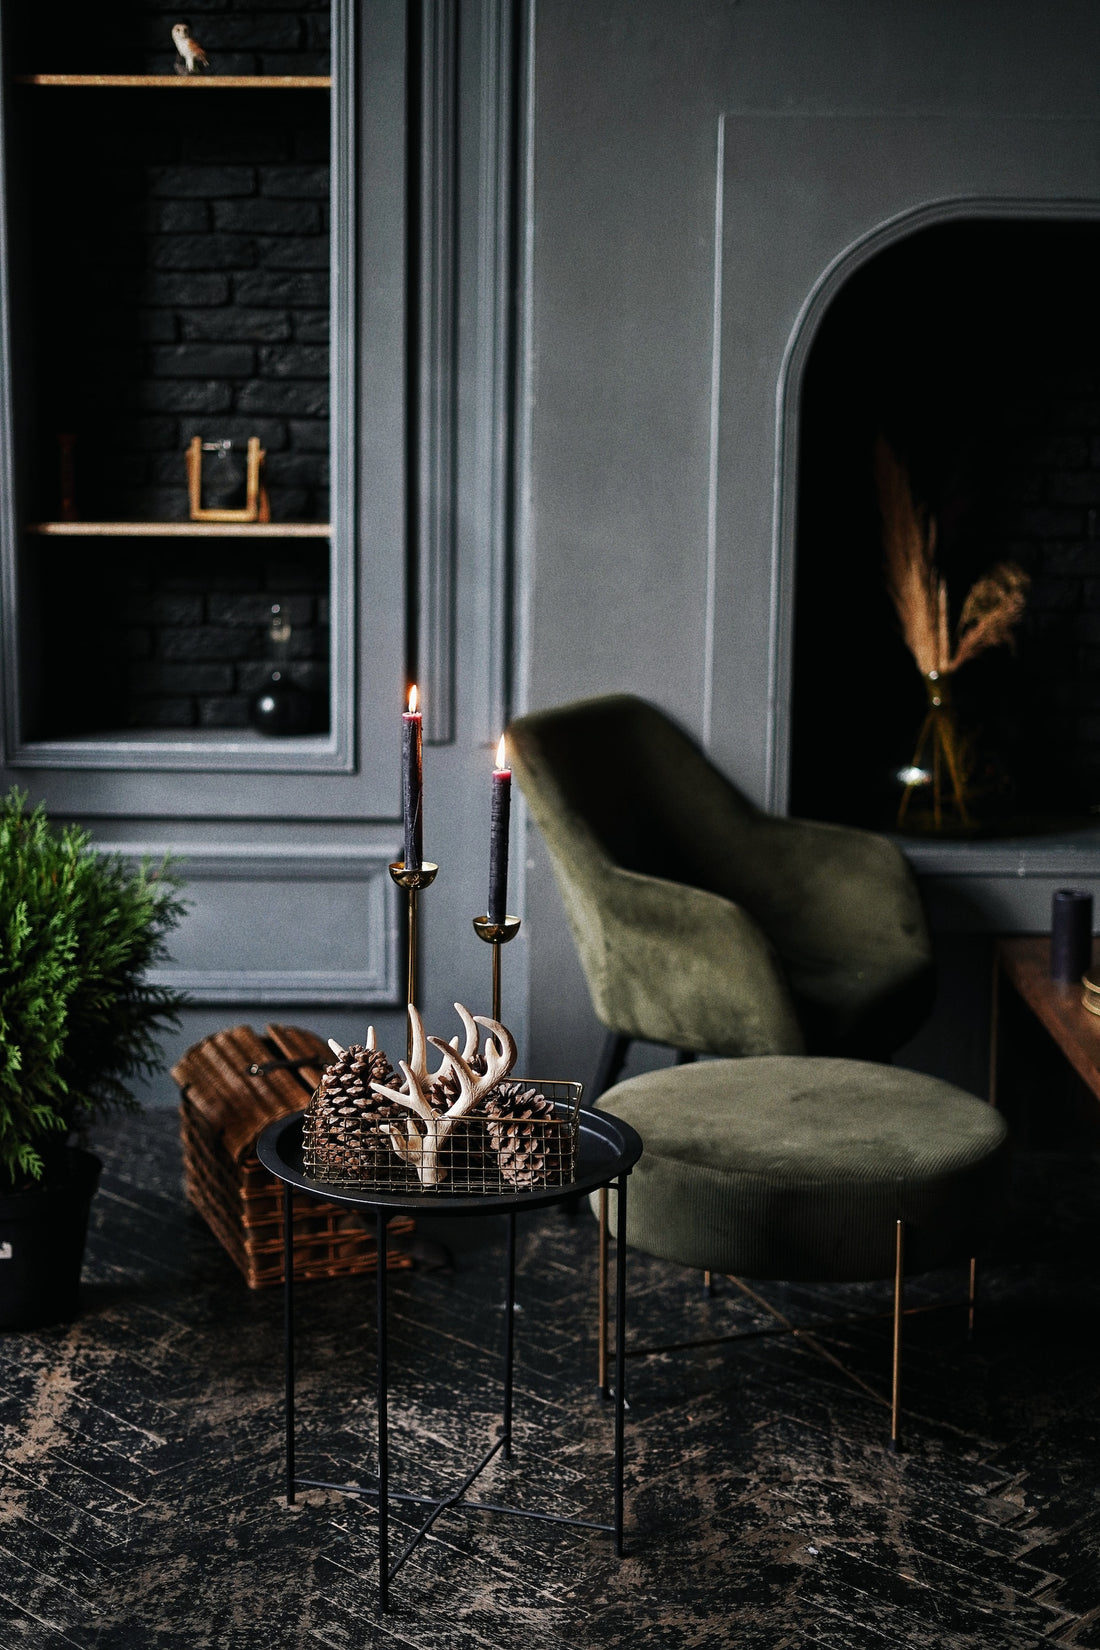 Embracing Winter Warmth: A French Touch to Bringing the Outdoors In